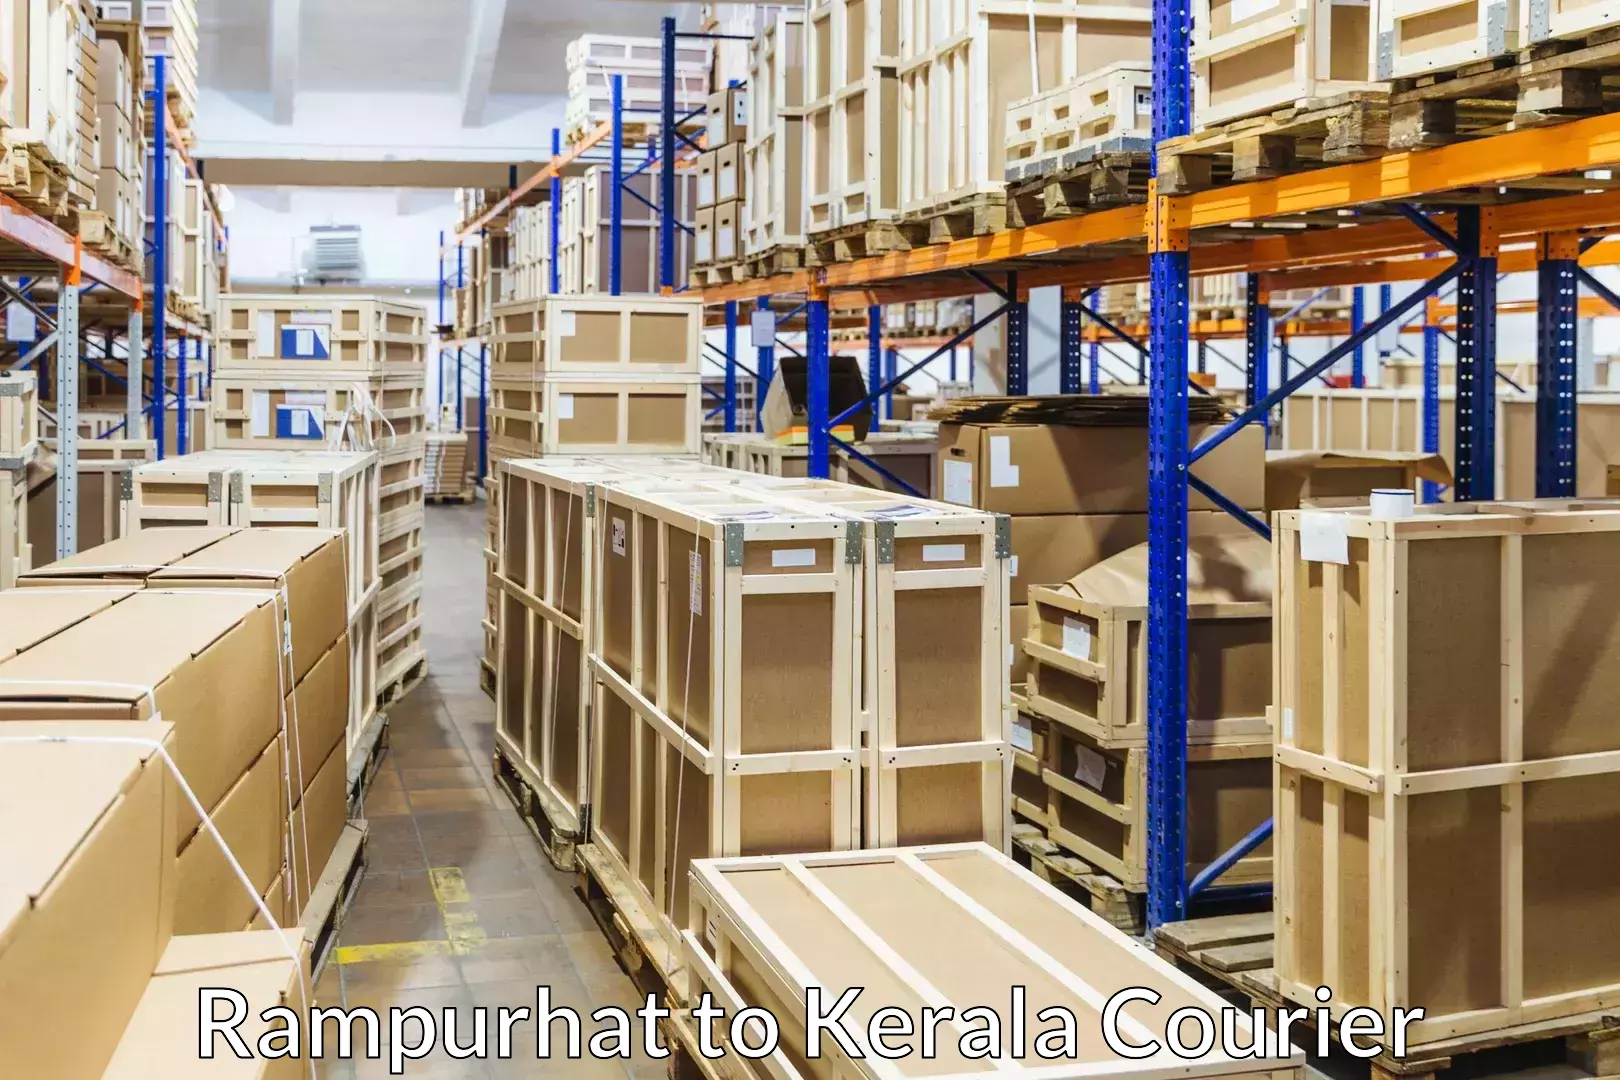 Comprehensive relocation services in Rampurhat to Kerala